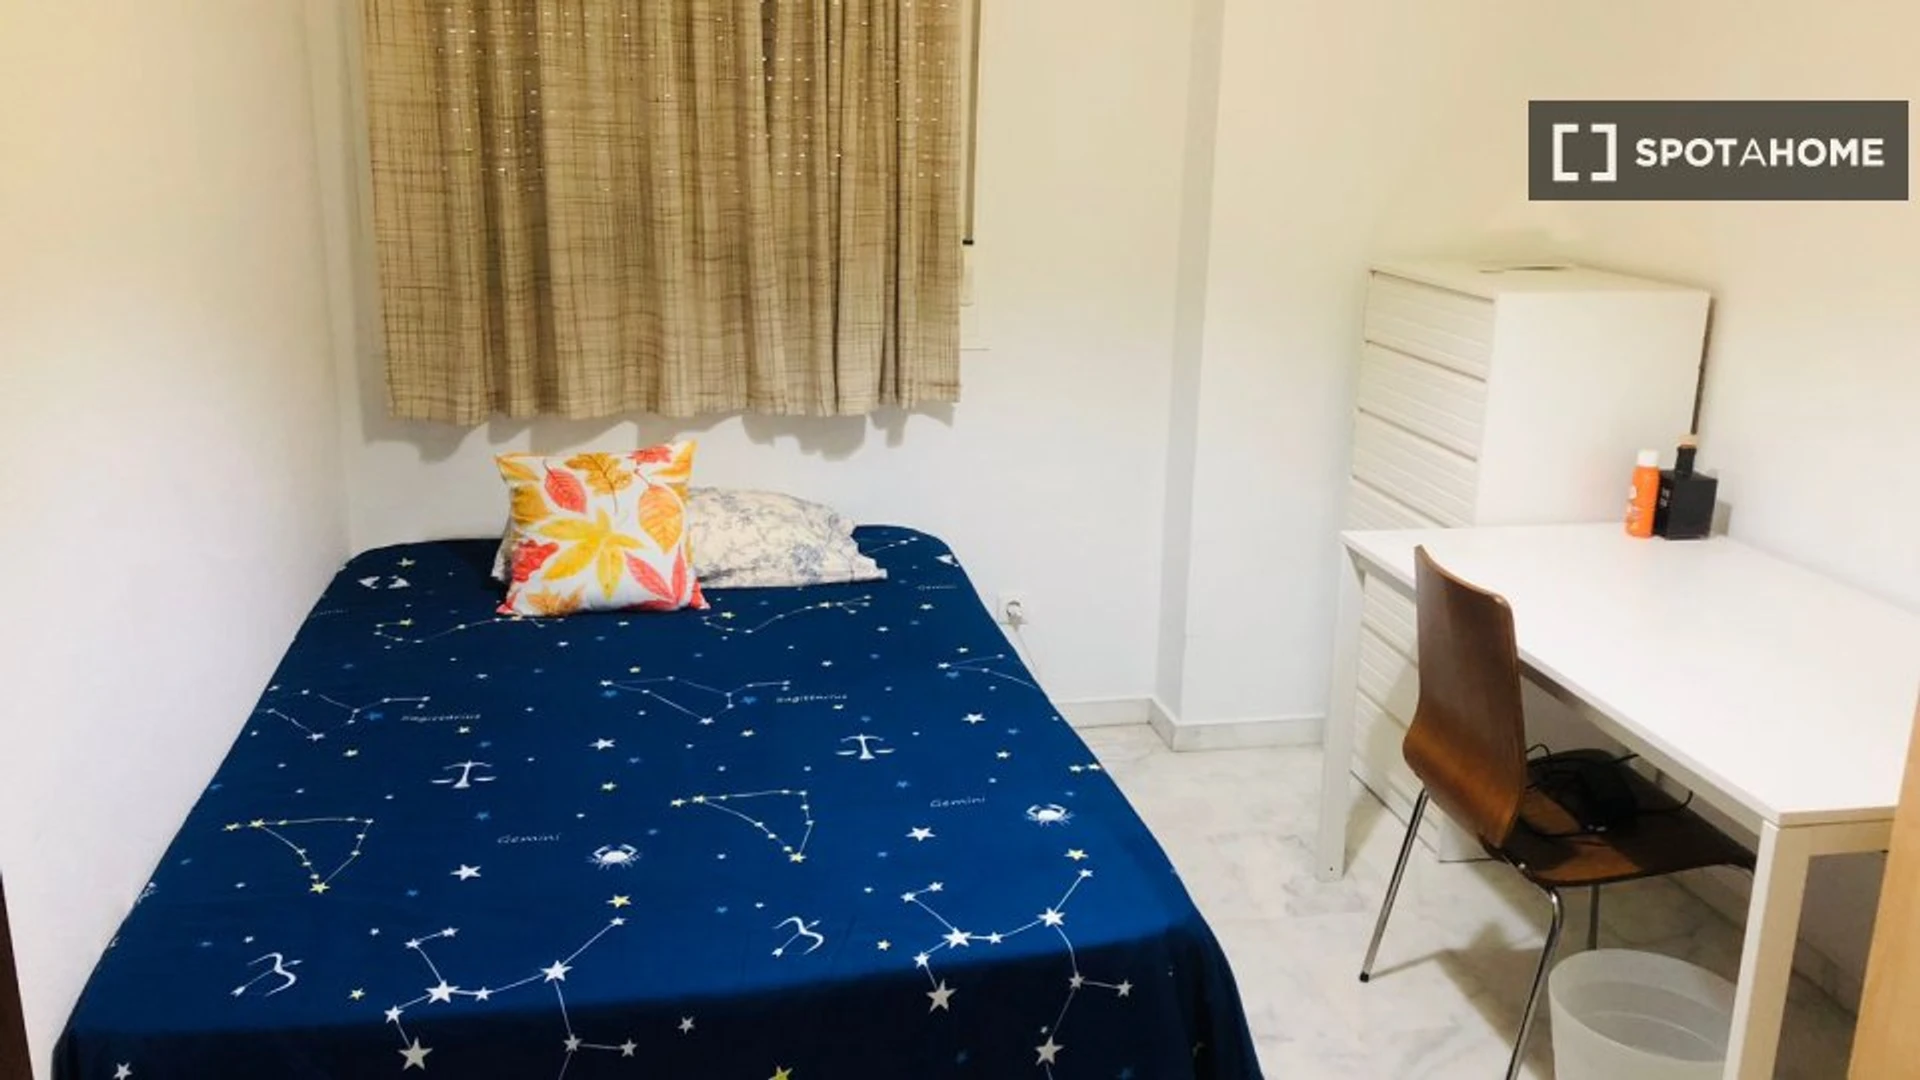 Room for rent in a shared flat in Seville